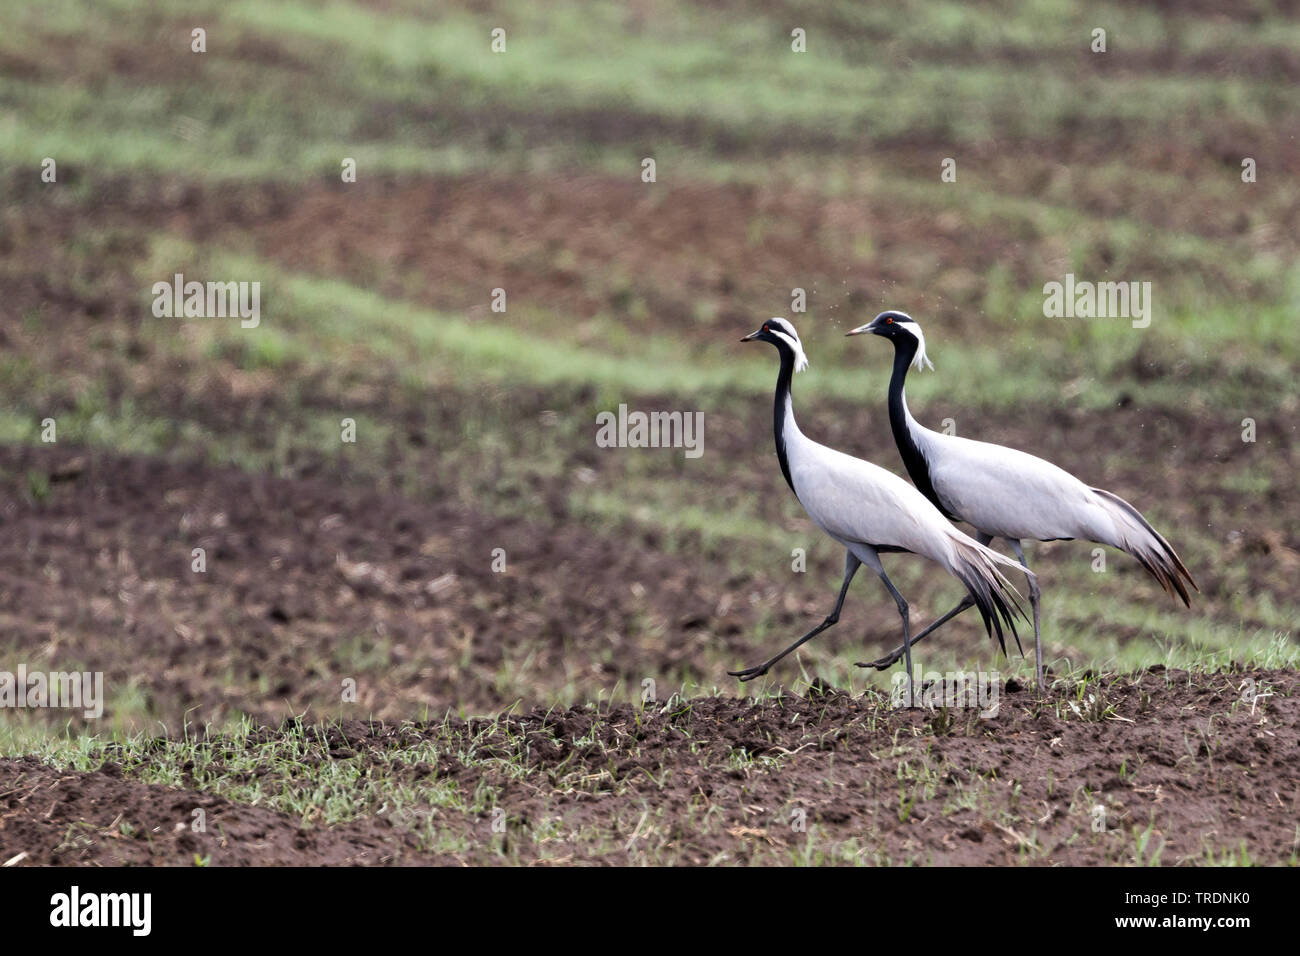 demoiselle crane (Anthropoides virgo), two cranes in courtship display on a field, Russia, Baikal Stock Photo